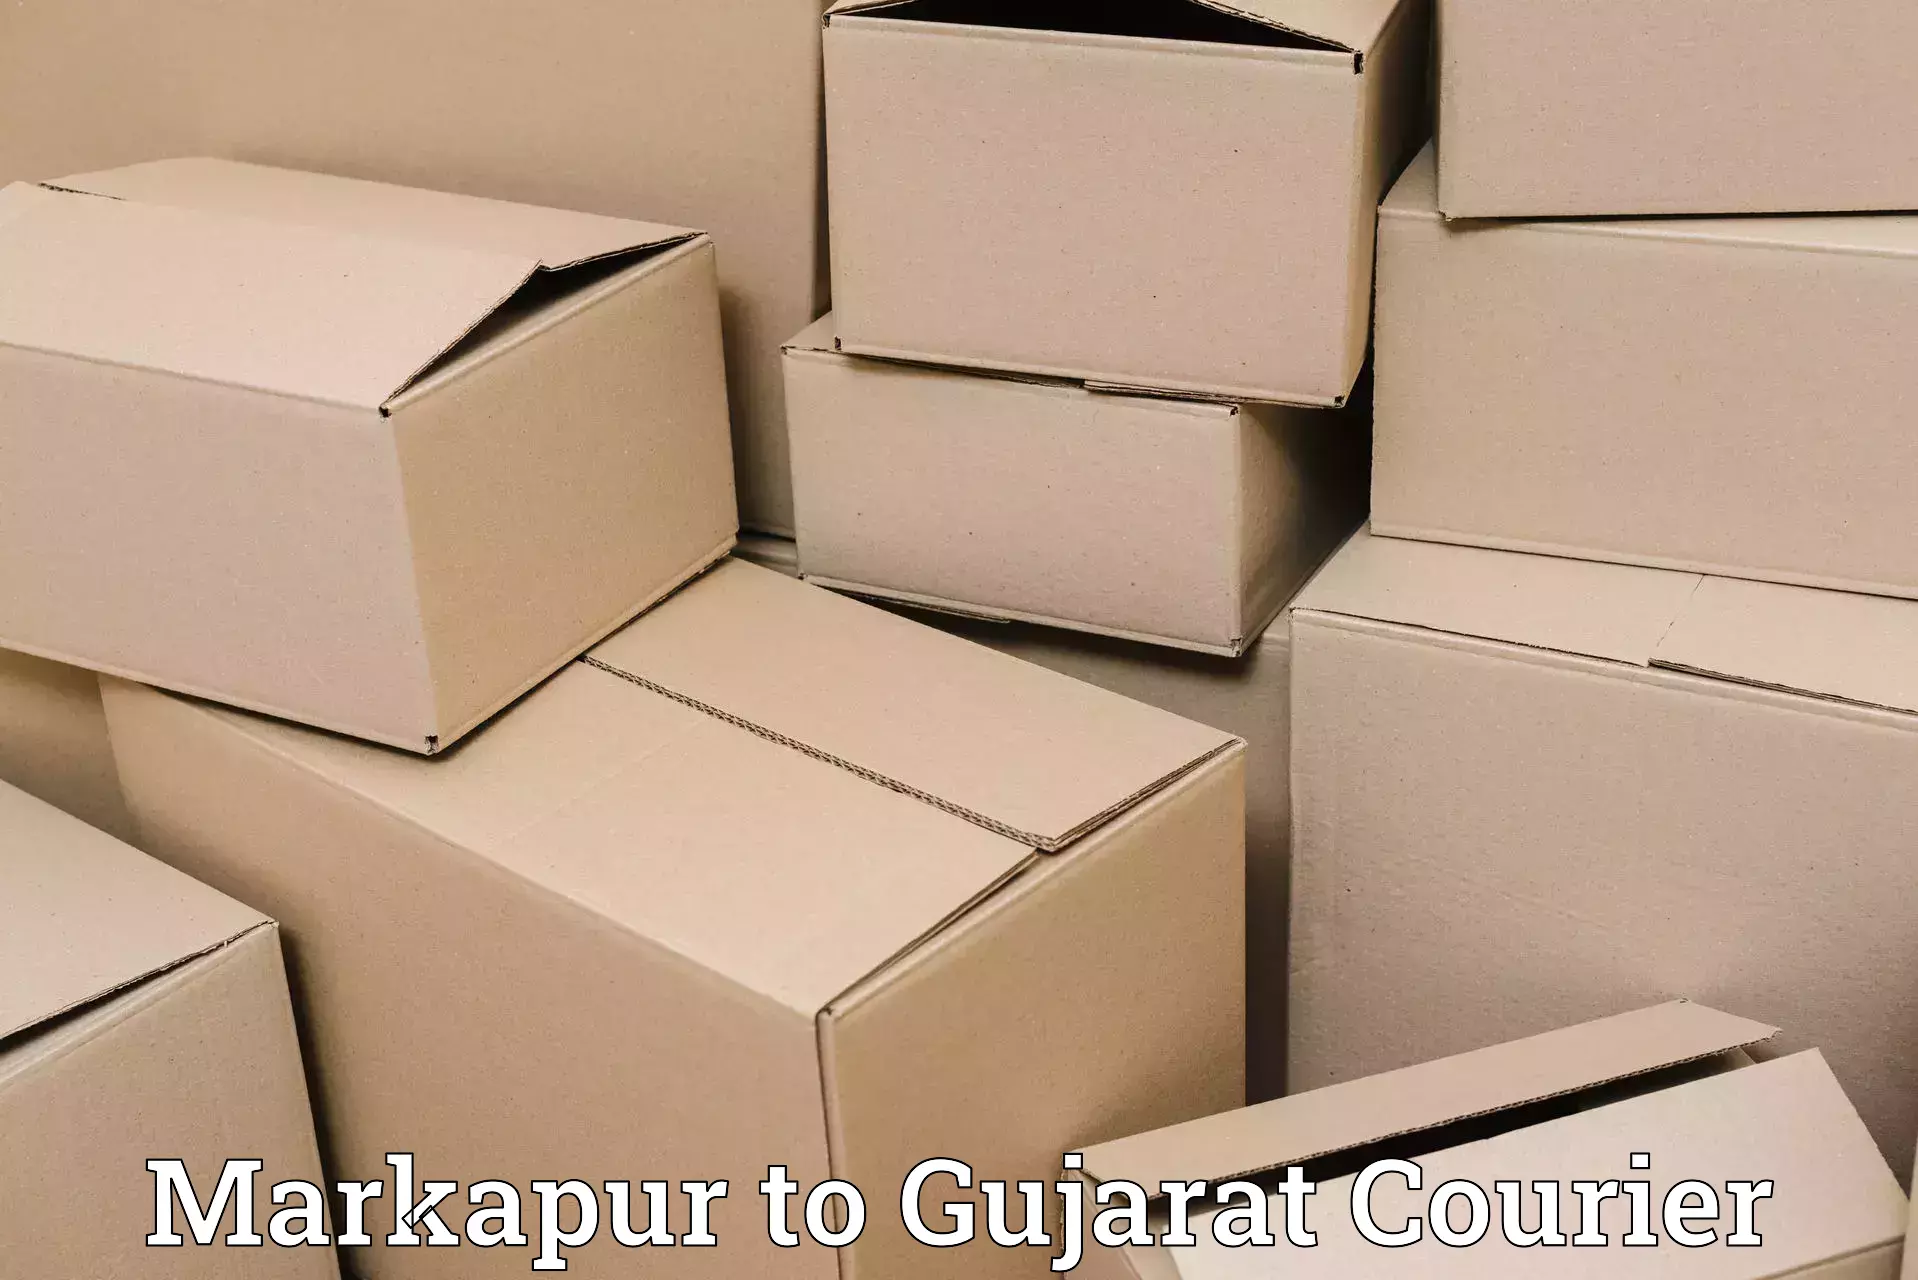 Global shipping networks in Markapur to Santrampur